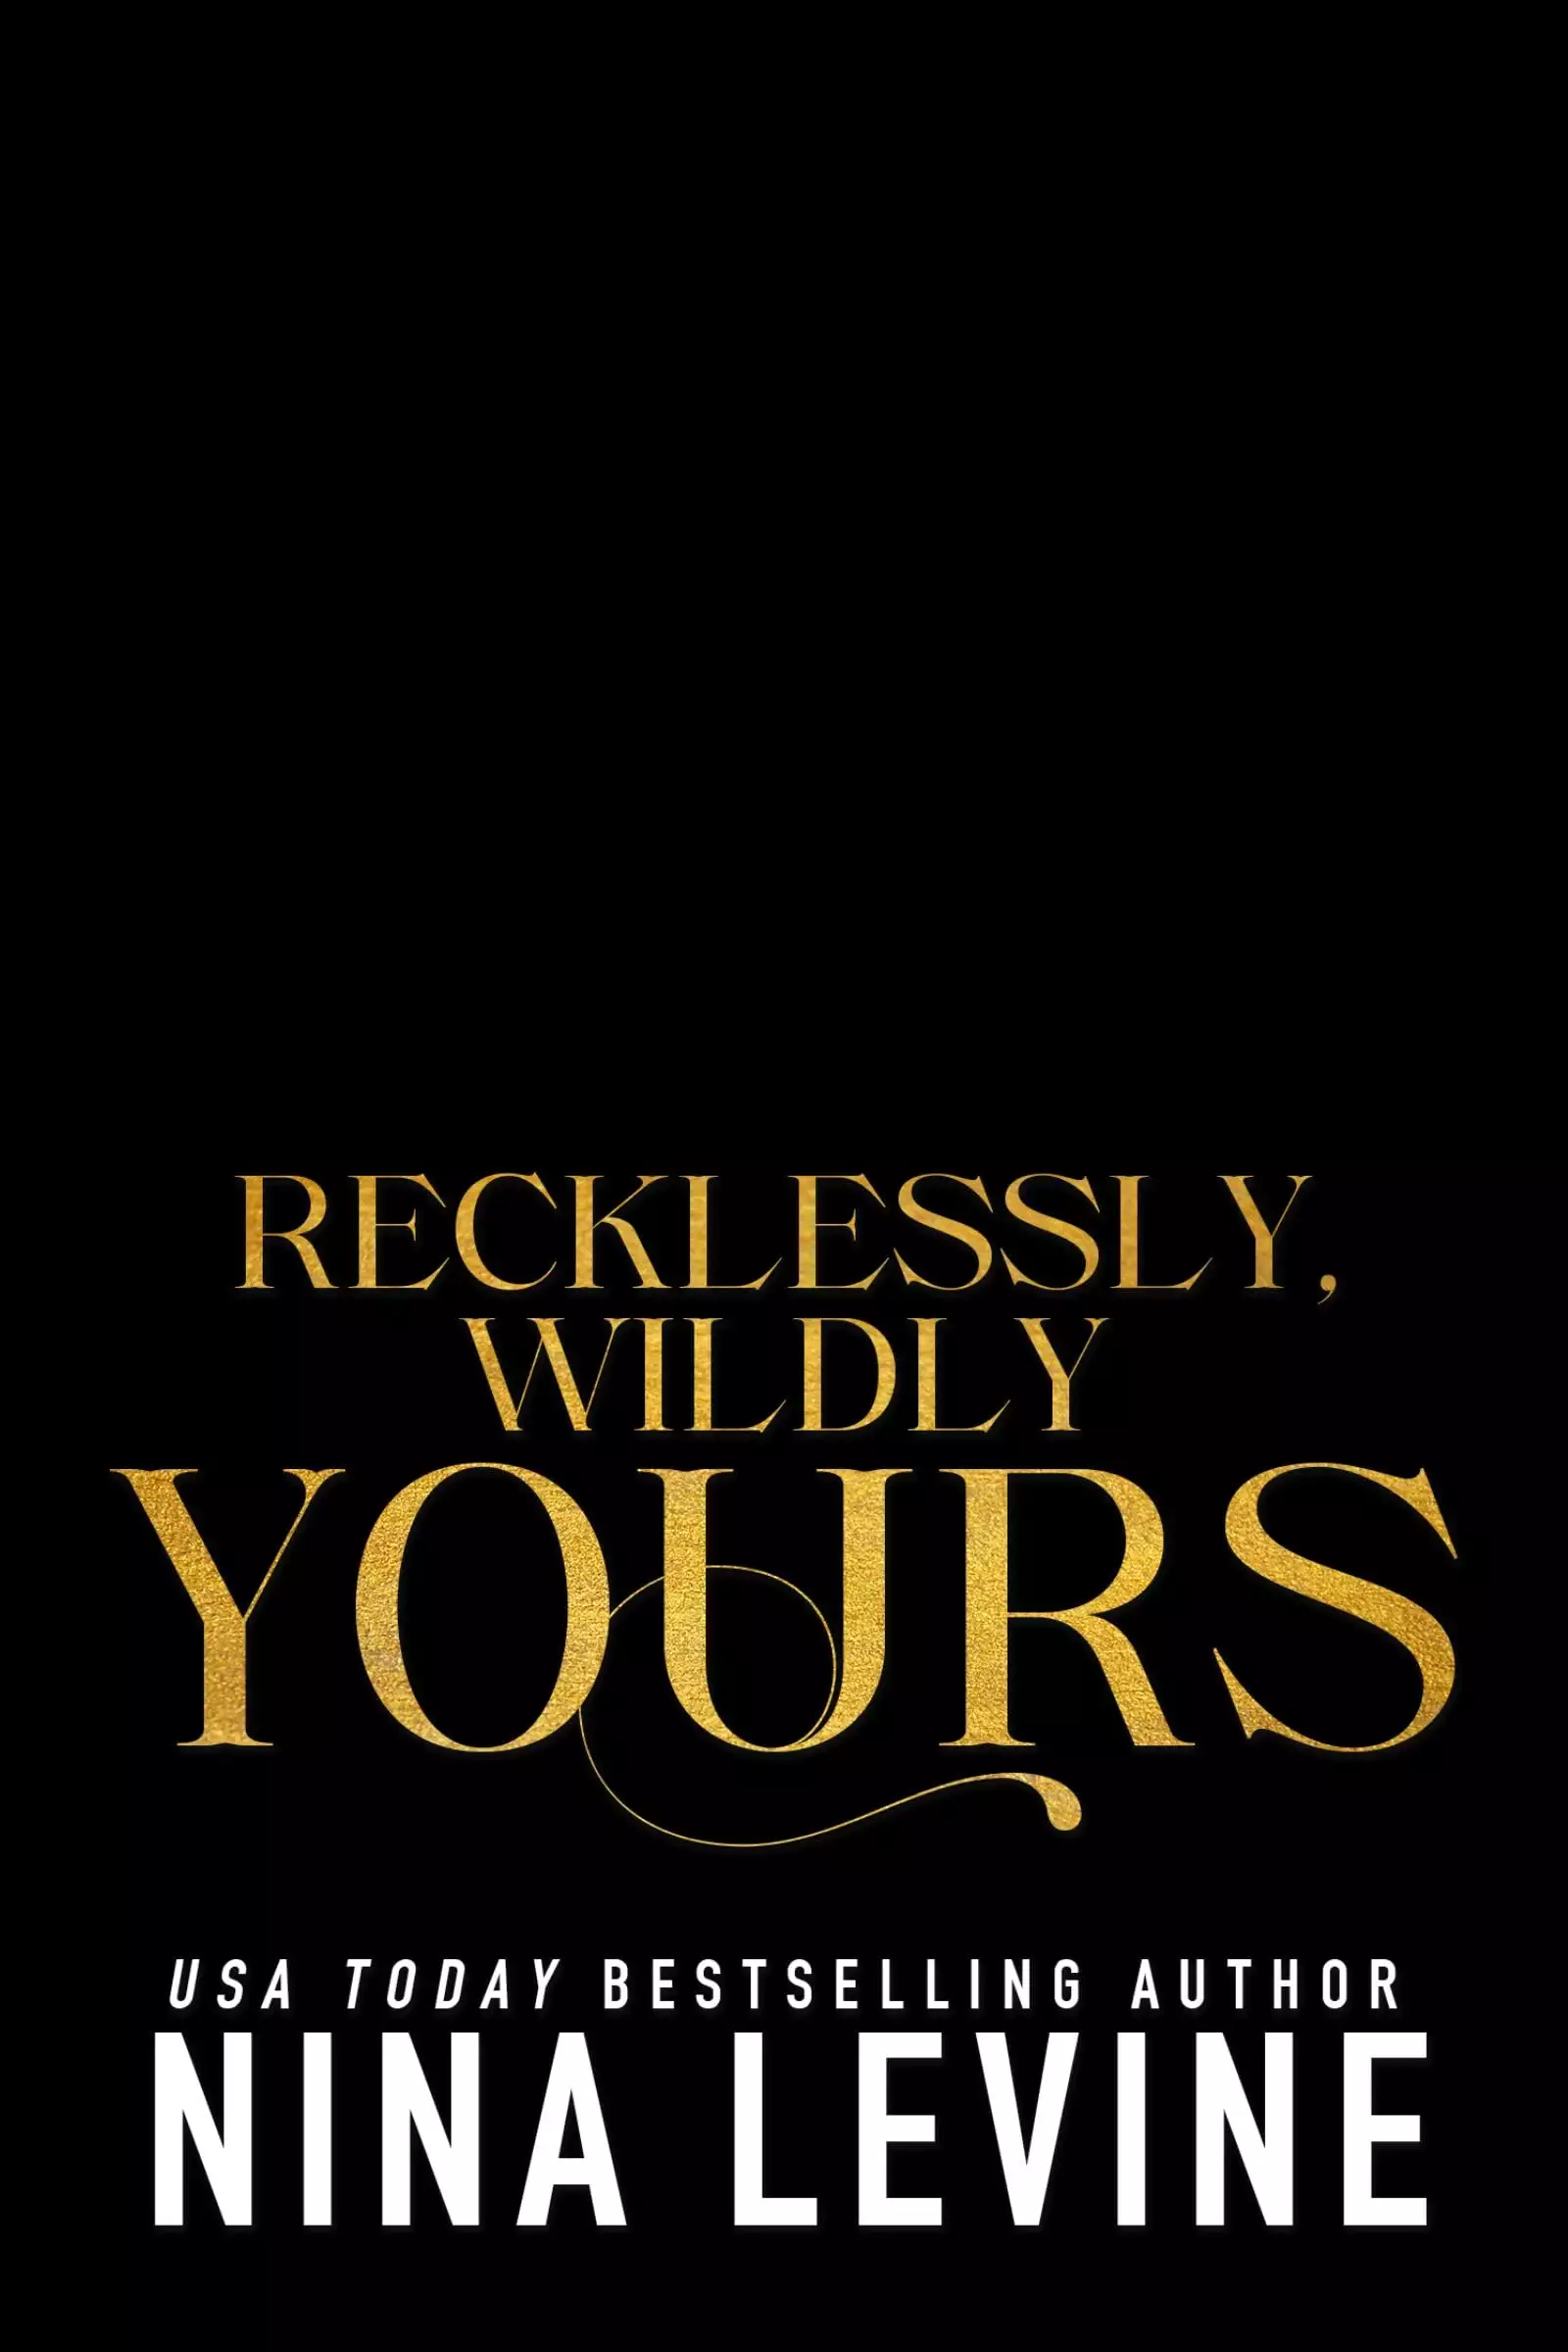 Recklessly, Wildly Yours